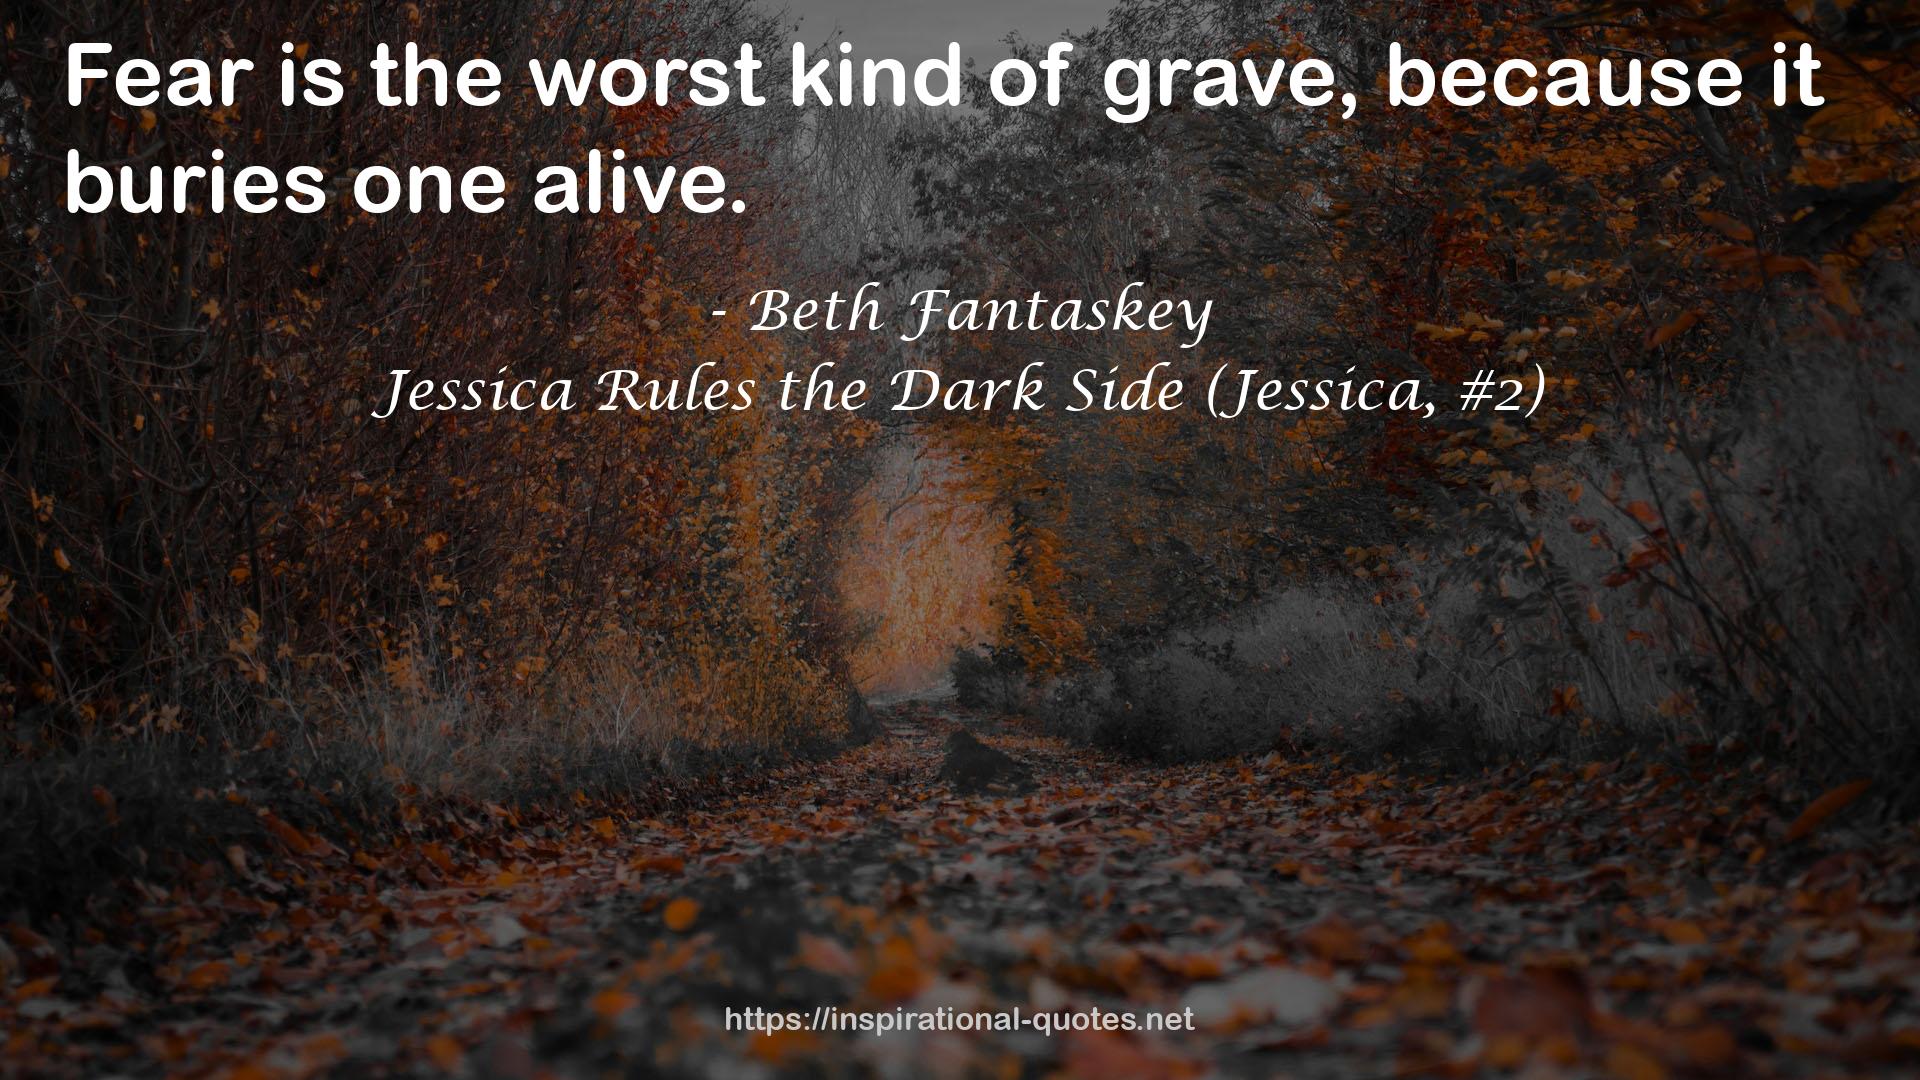 Jessica Rules the Dark Side (Jessica, #2) QUOTES